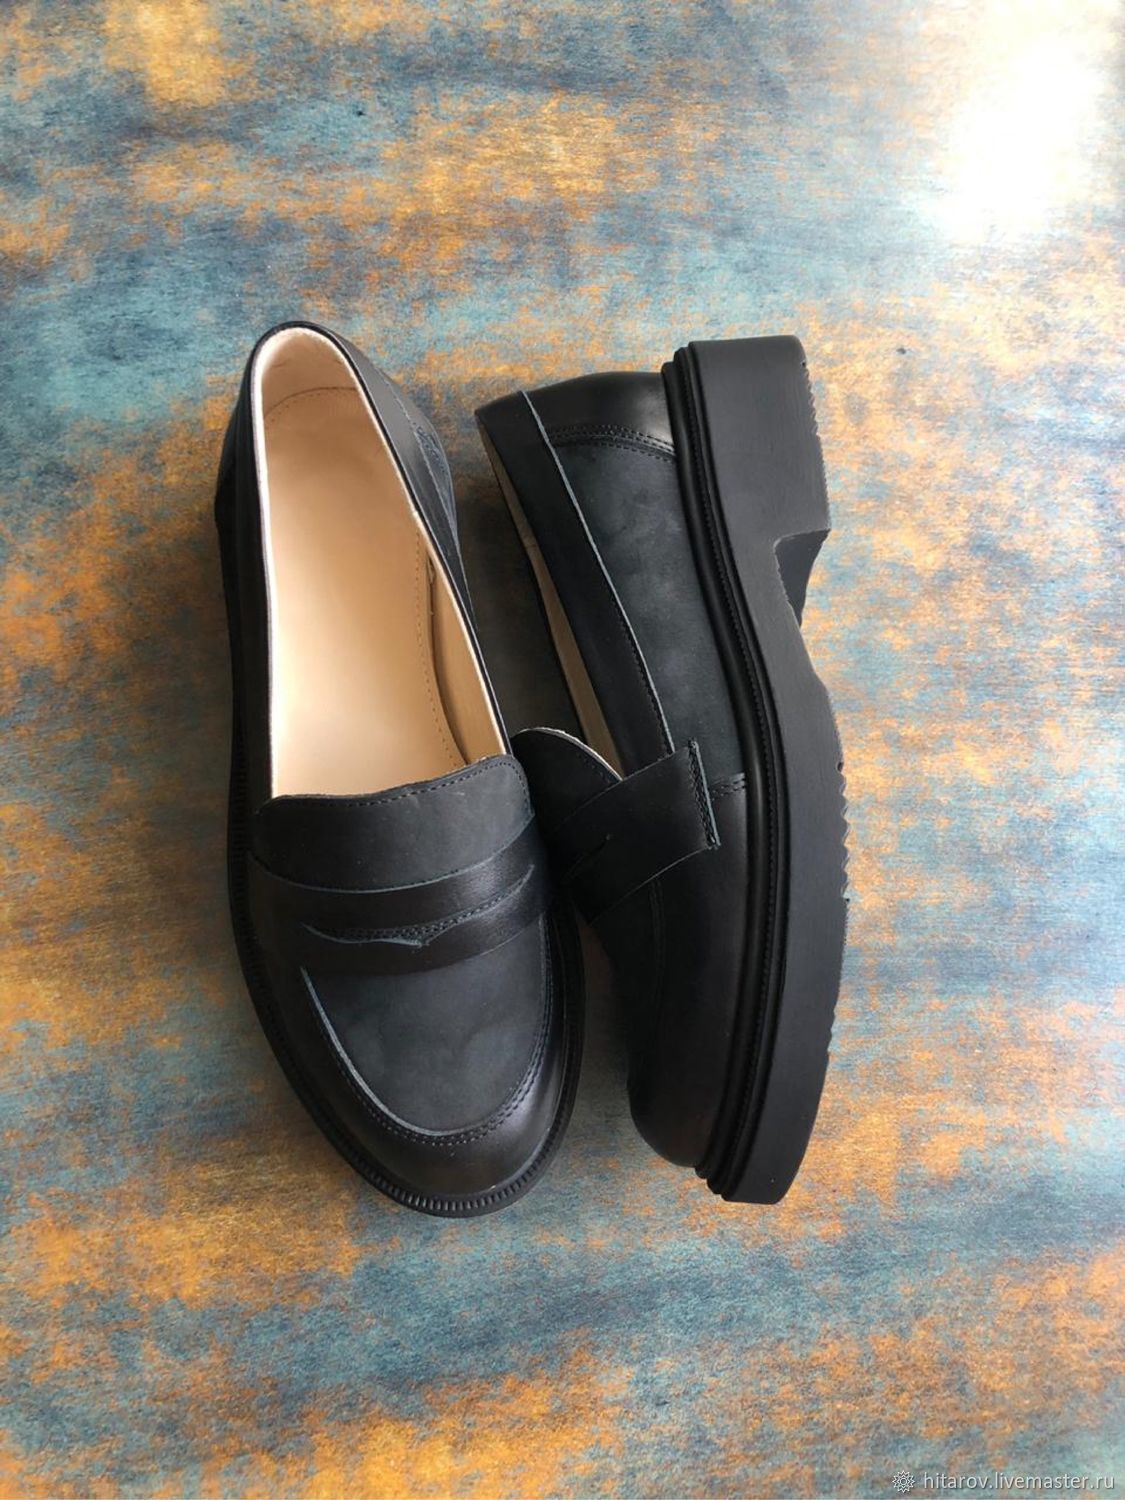 Loafers View black leather / black nubuck smooth sole, Loafers, Moscow,  Фото №1